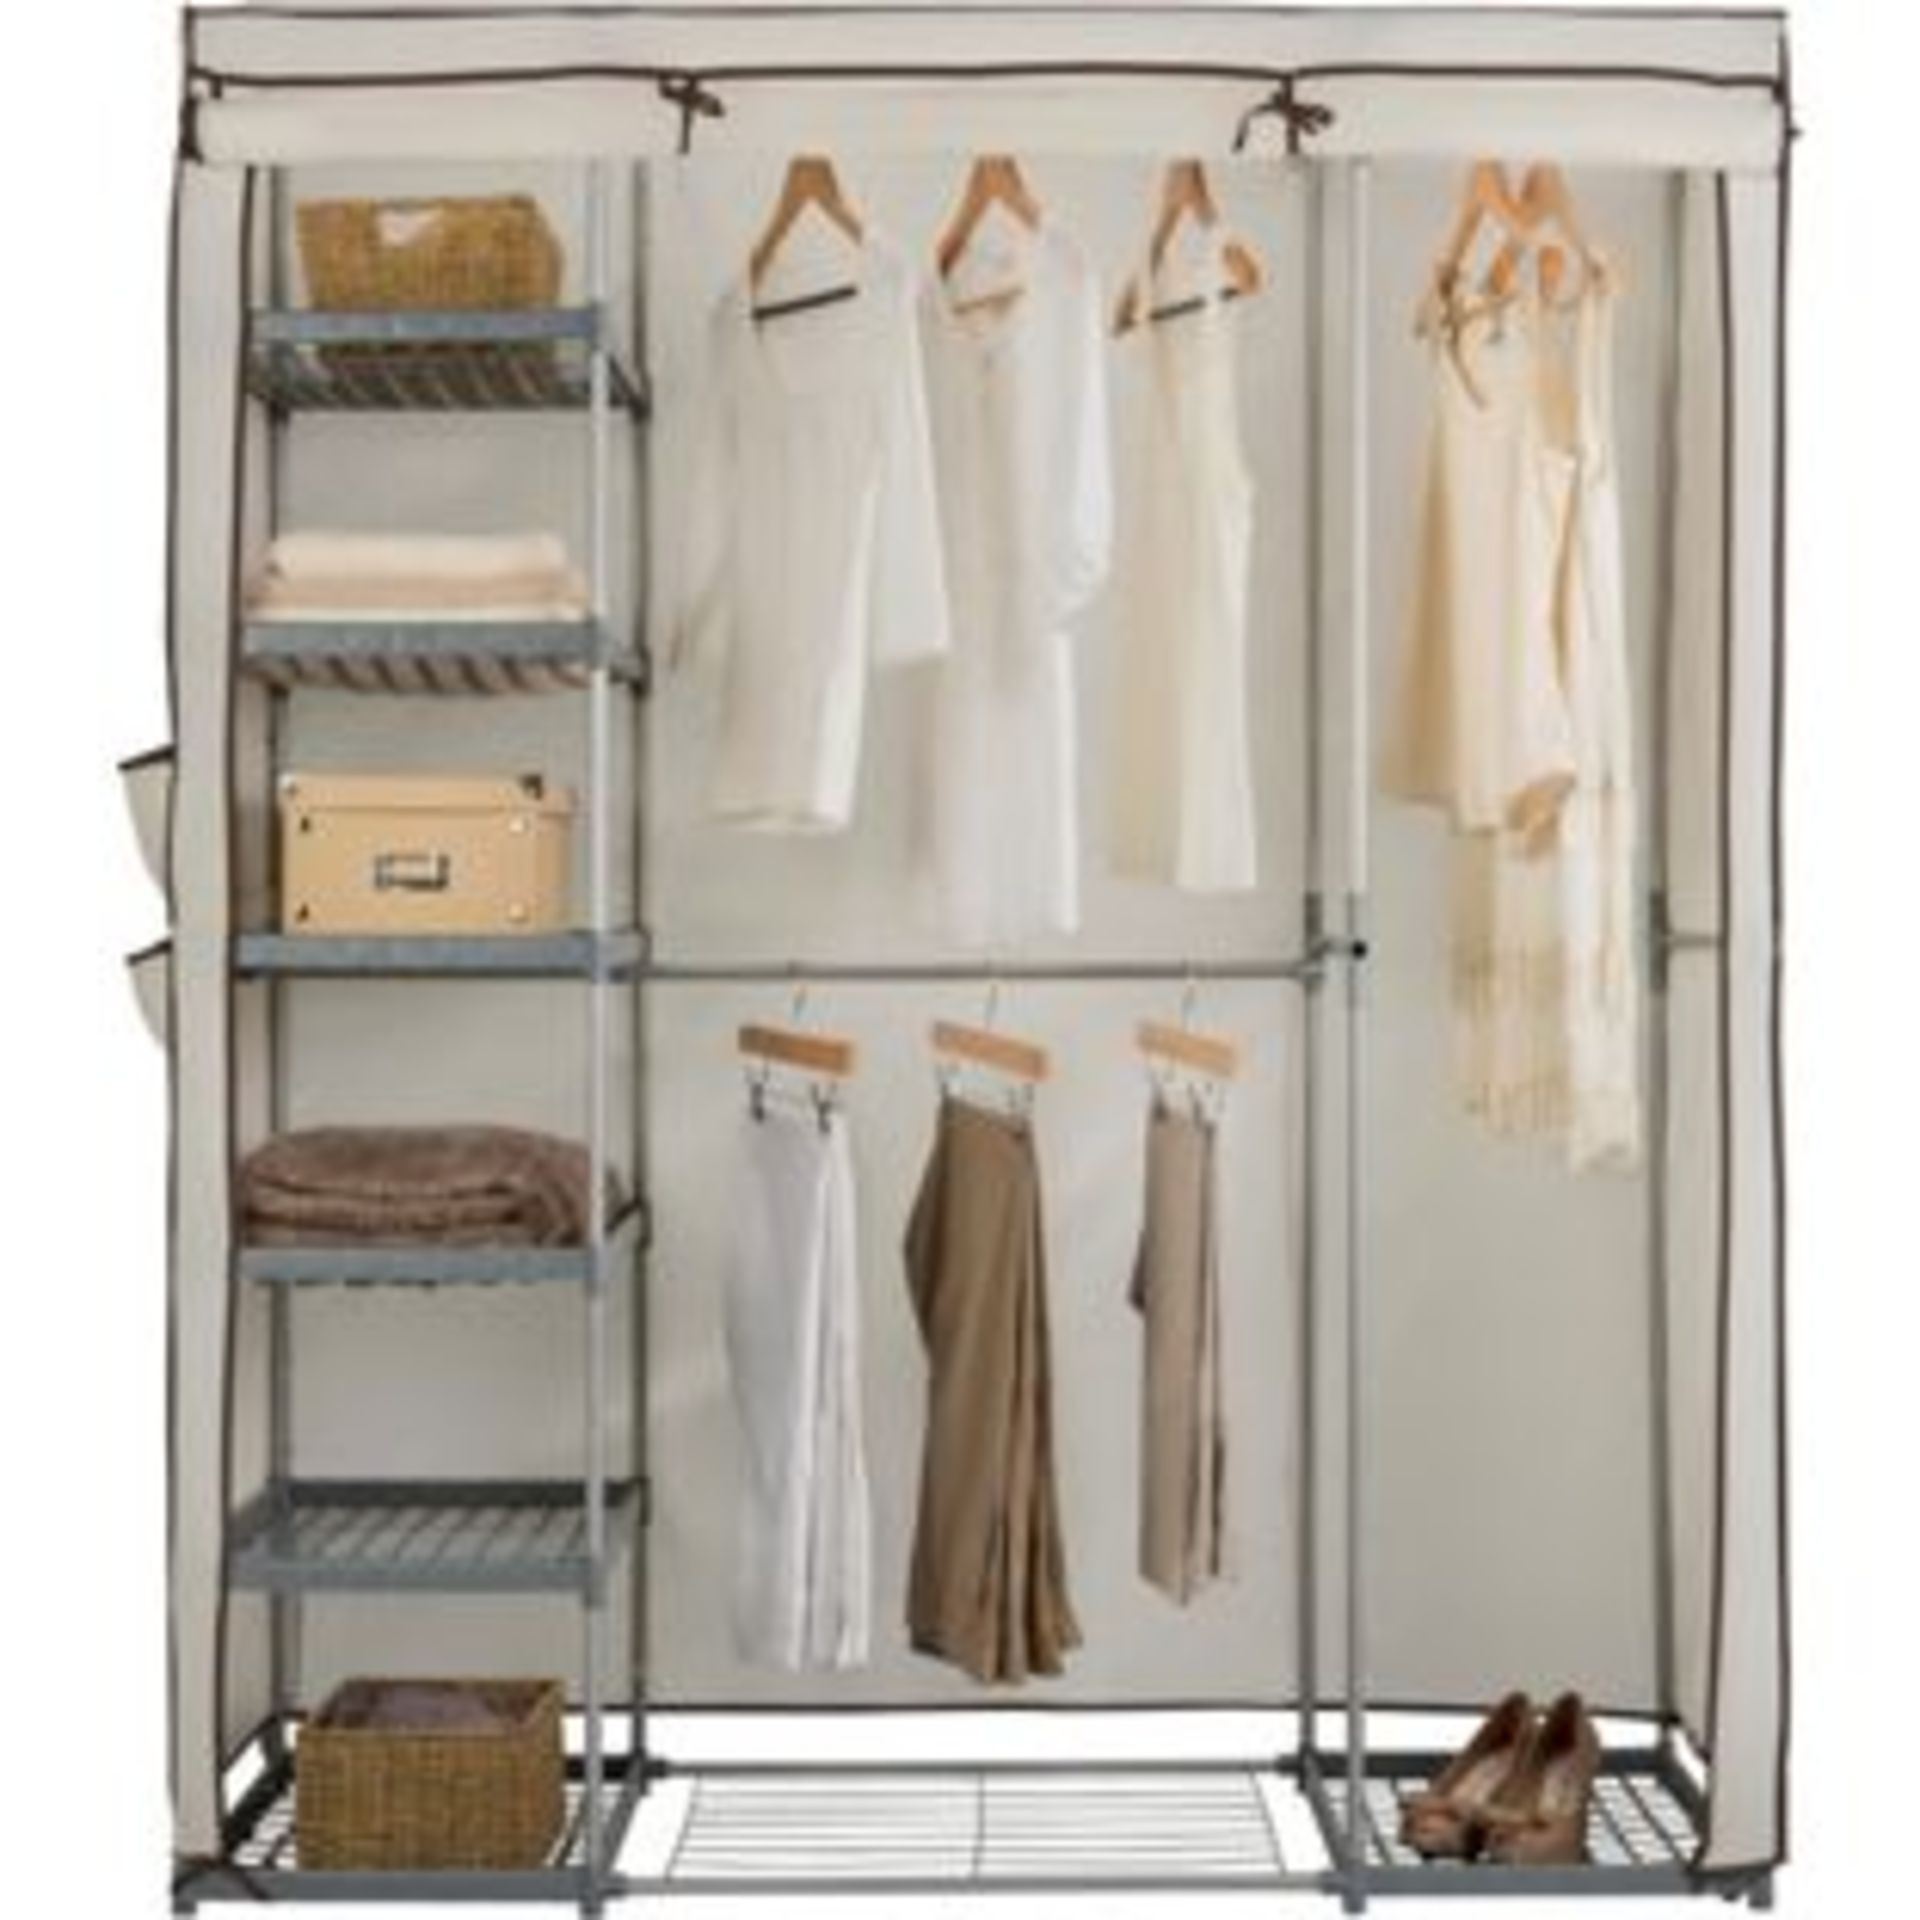 HOME Metal and Polycotton Triple Wardrobe - Cream. Size H175, W147, D54cm. Boxeed & Unchecked.